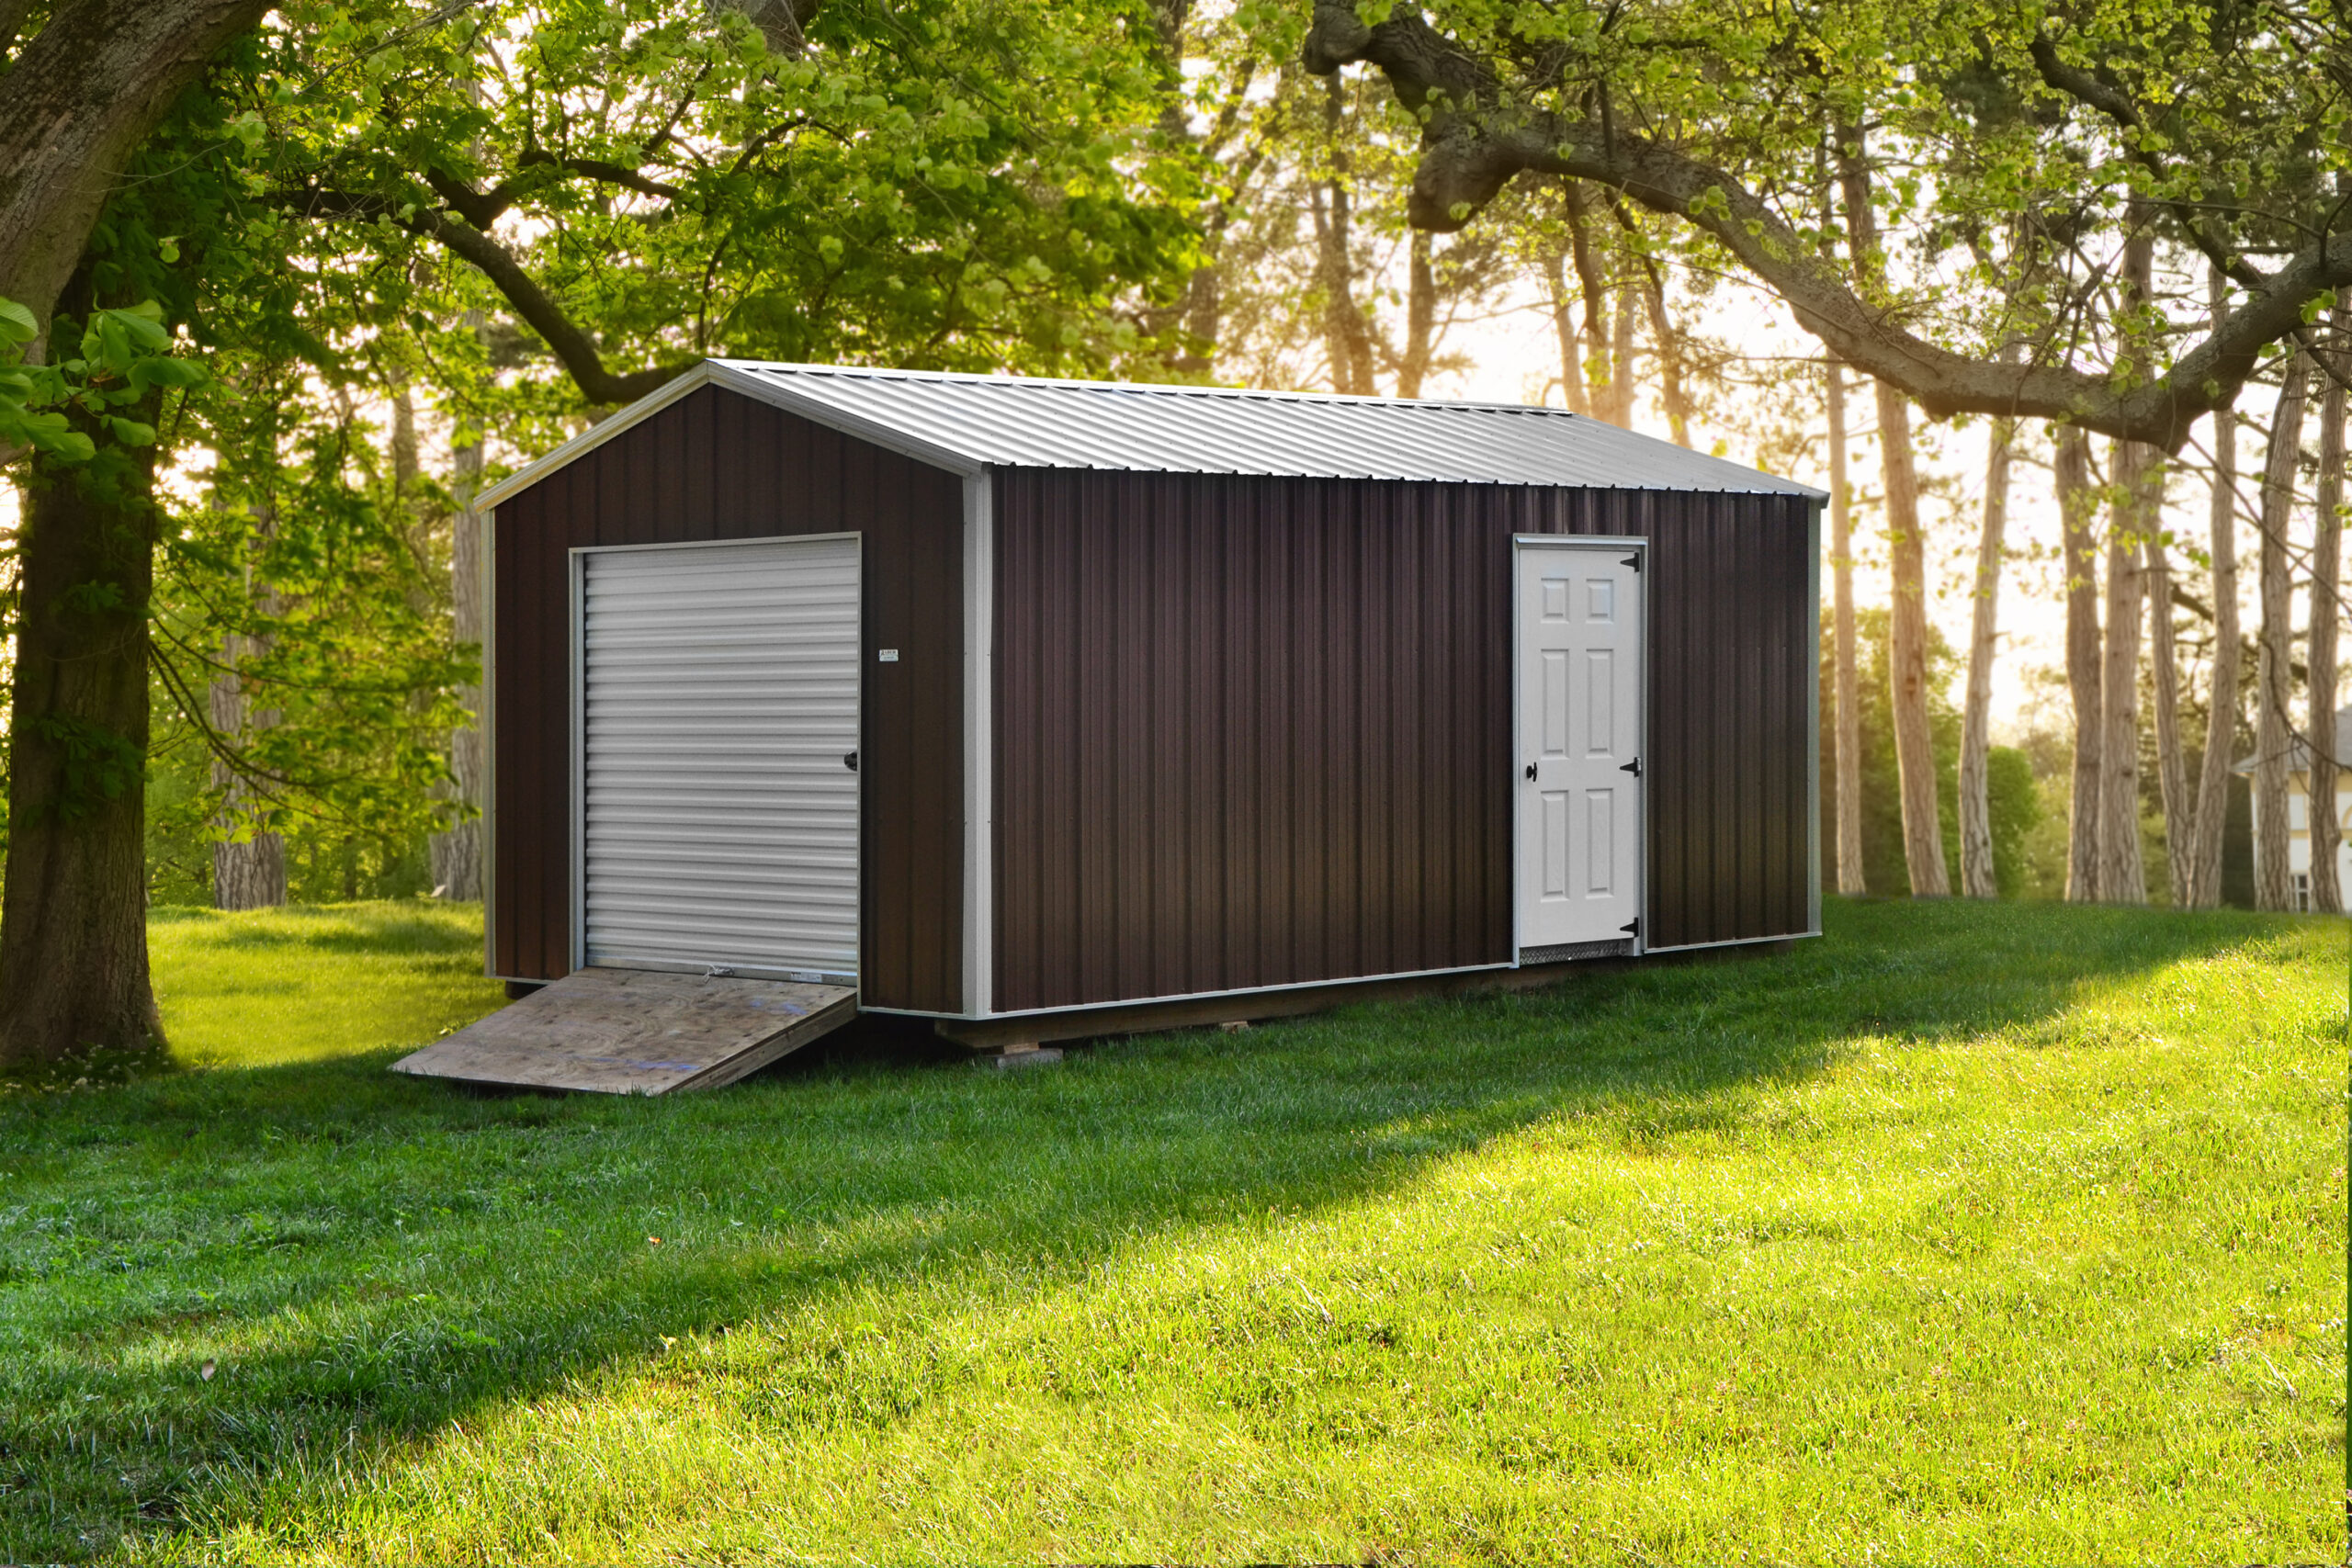 How to Keep Your Metal Shed Cool in the Summer